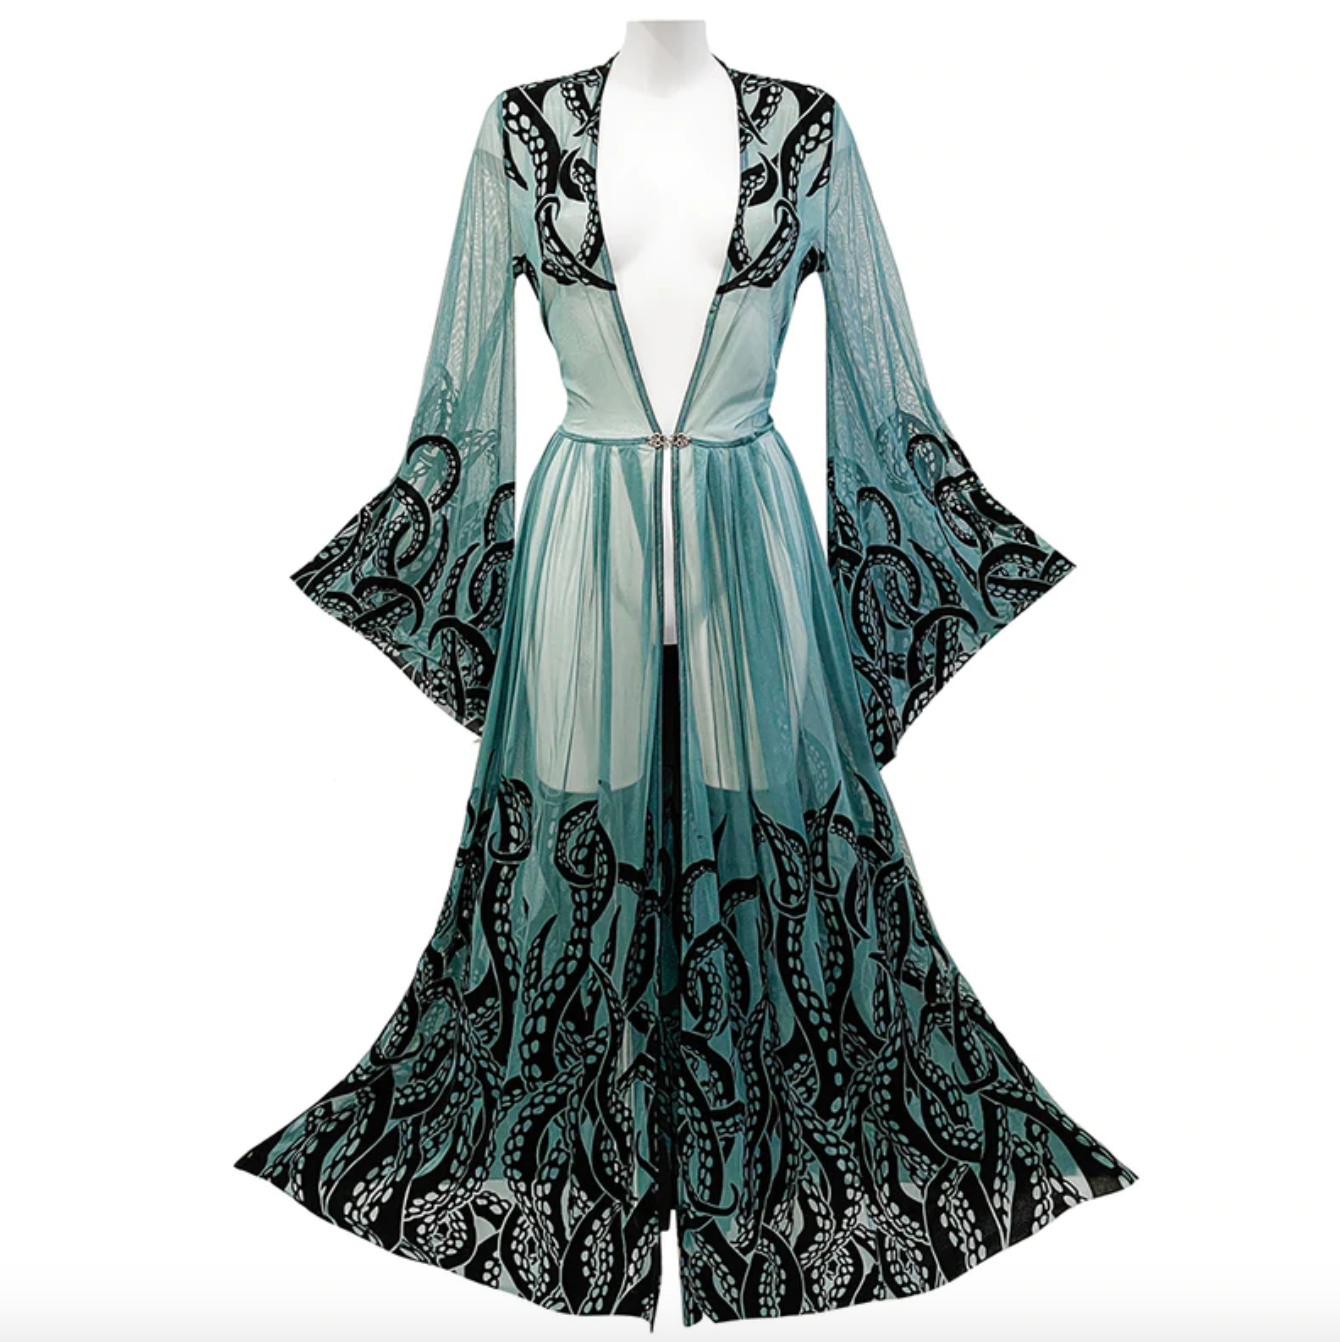 Green sheer mesh robe from Videnoir with black octopus tentacles. Ursula the sea witch from The Little Mermaid lingerie